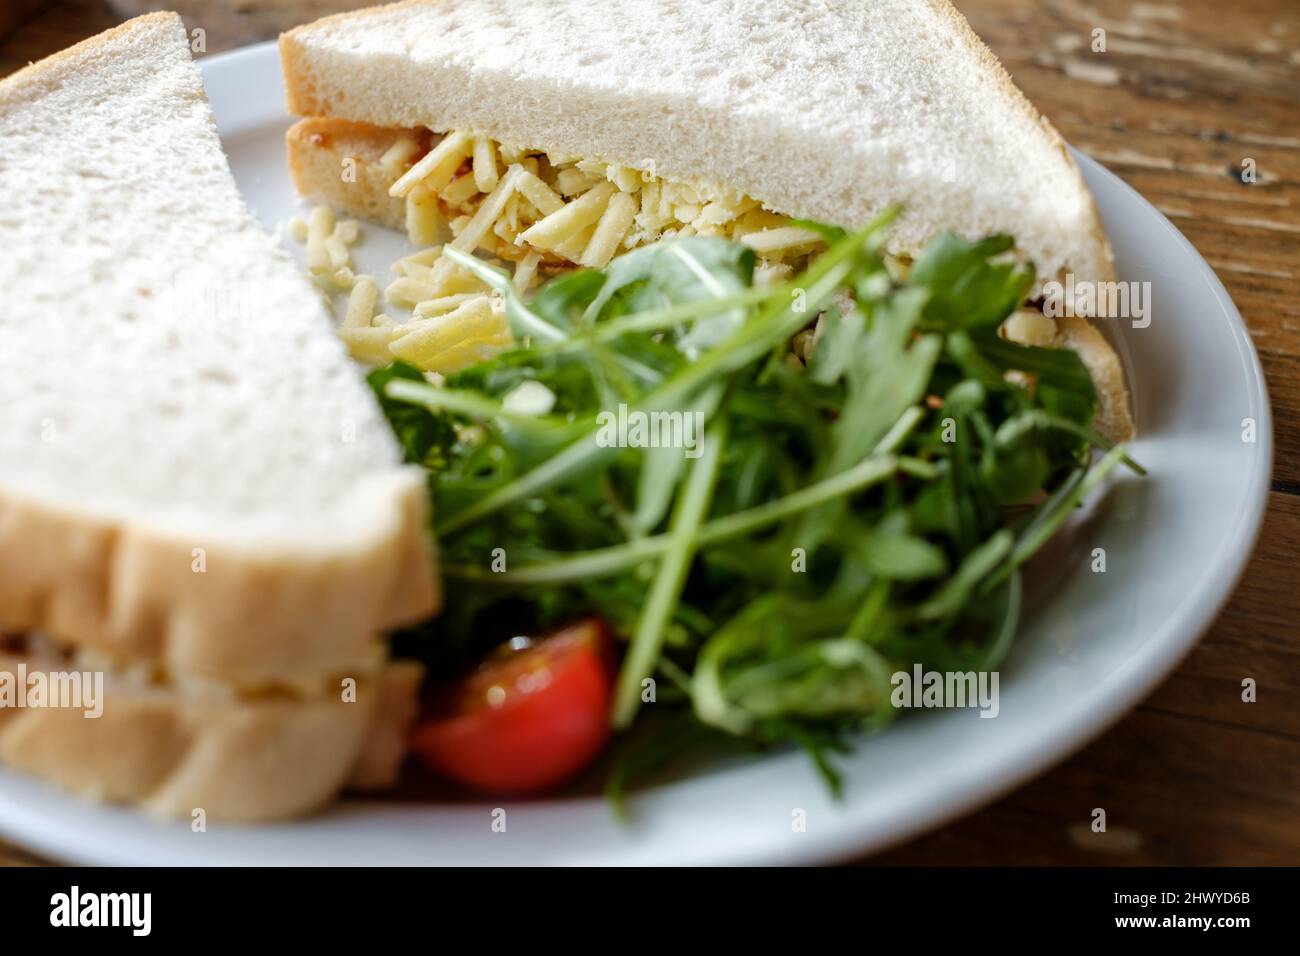 A freshly made, grated cheddar cheese, sandwich, made with white bread. Its served with a salad garnish on a plain white plate Stock Photo